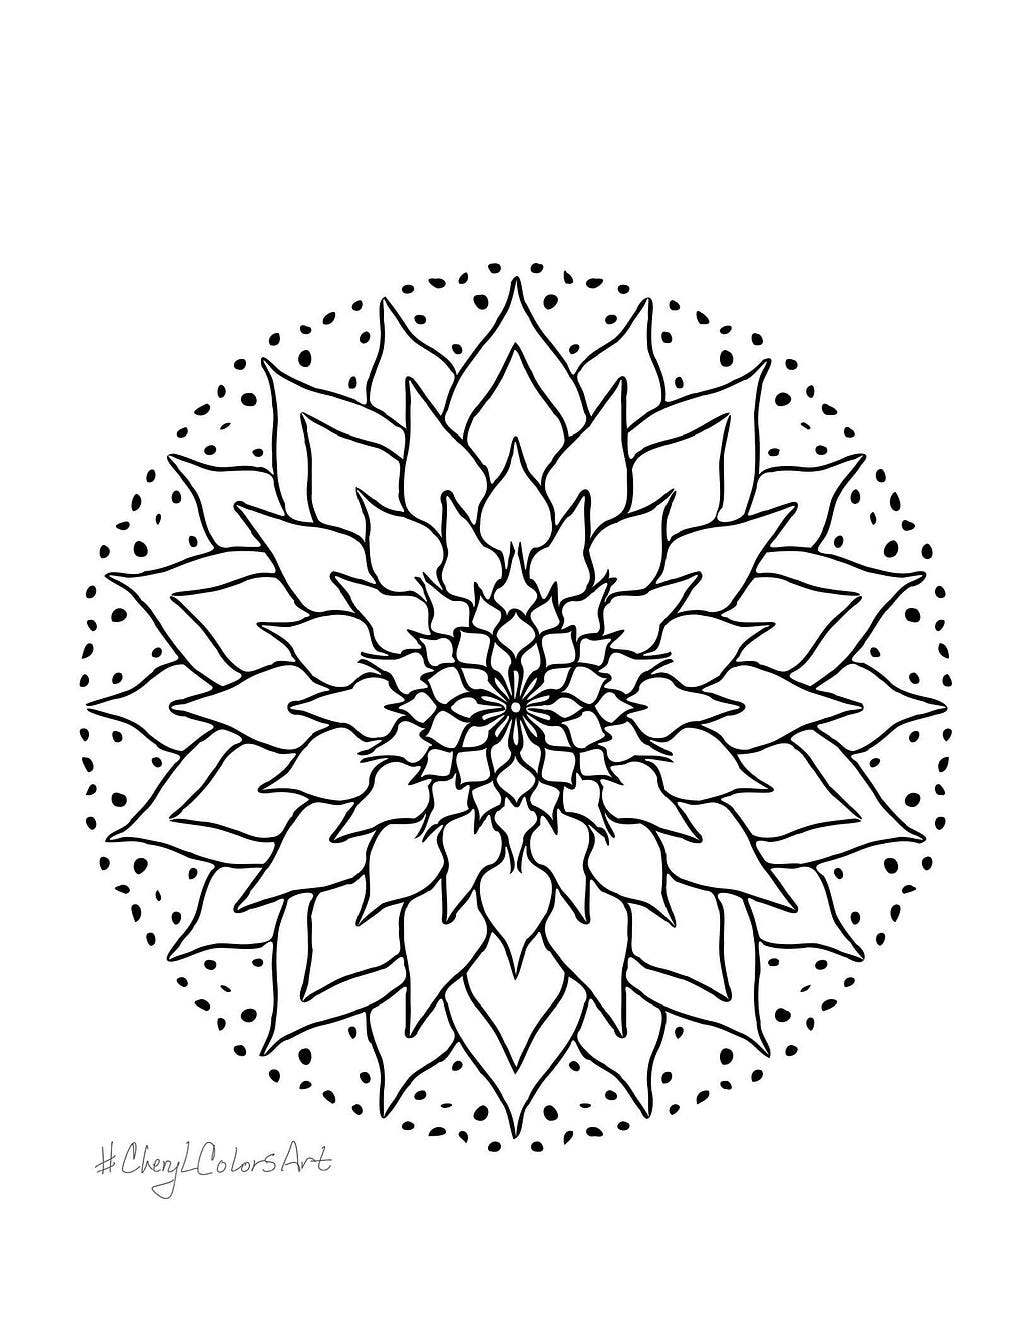 Free coloring page #CherylColorsArt Adult coloring books